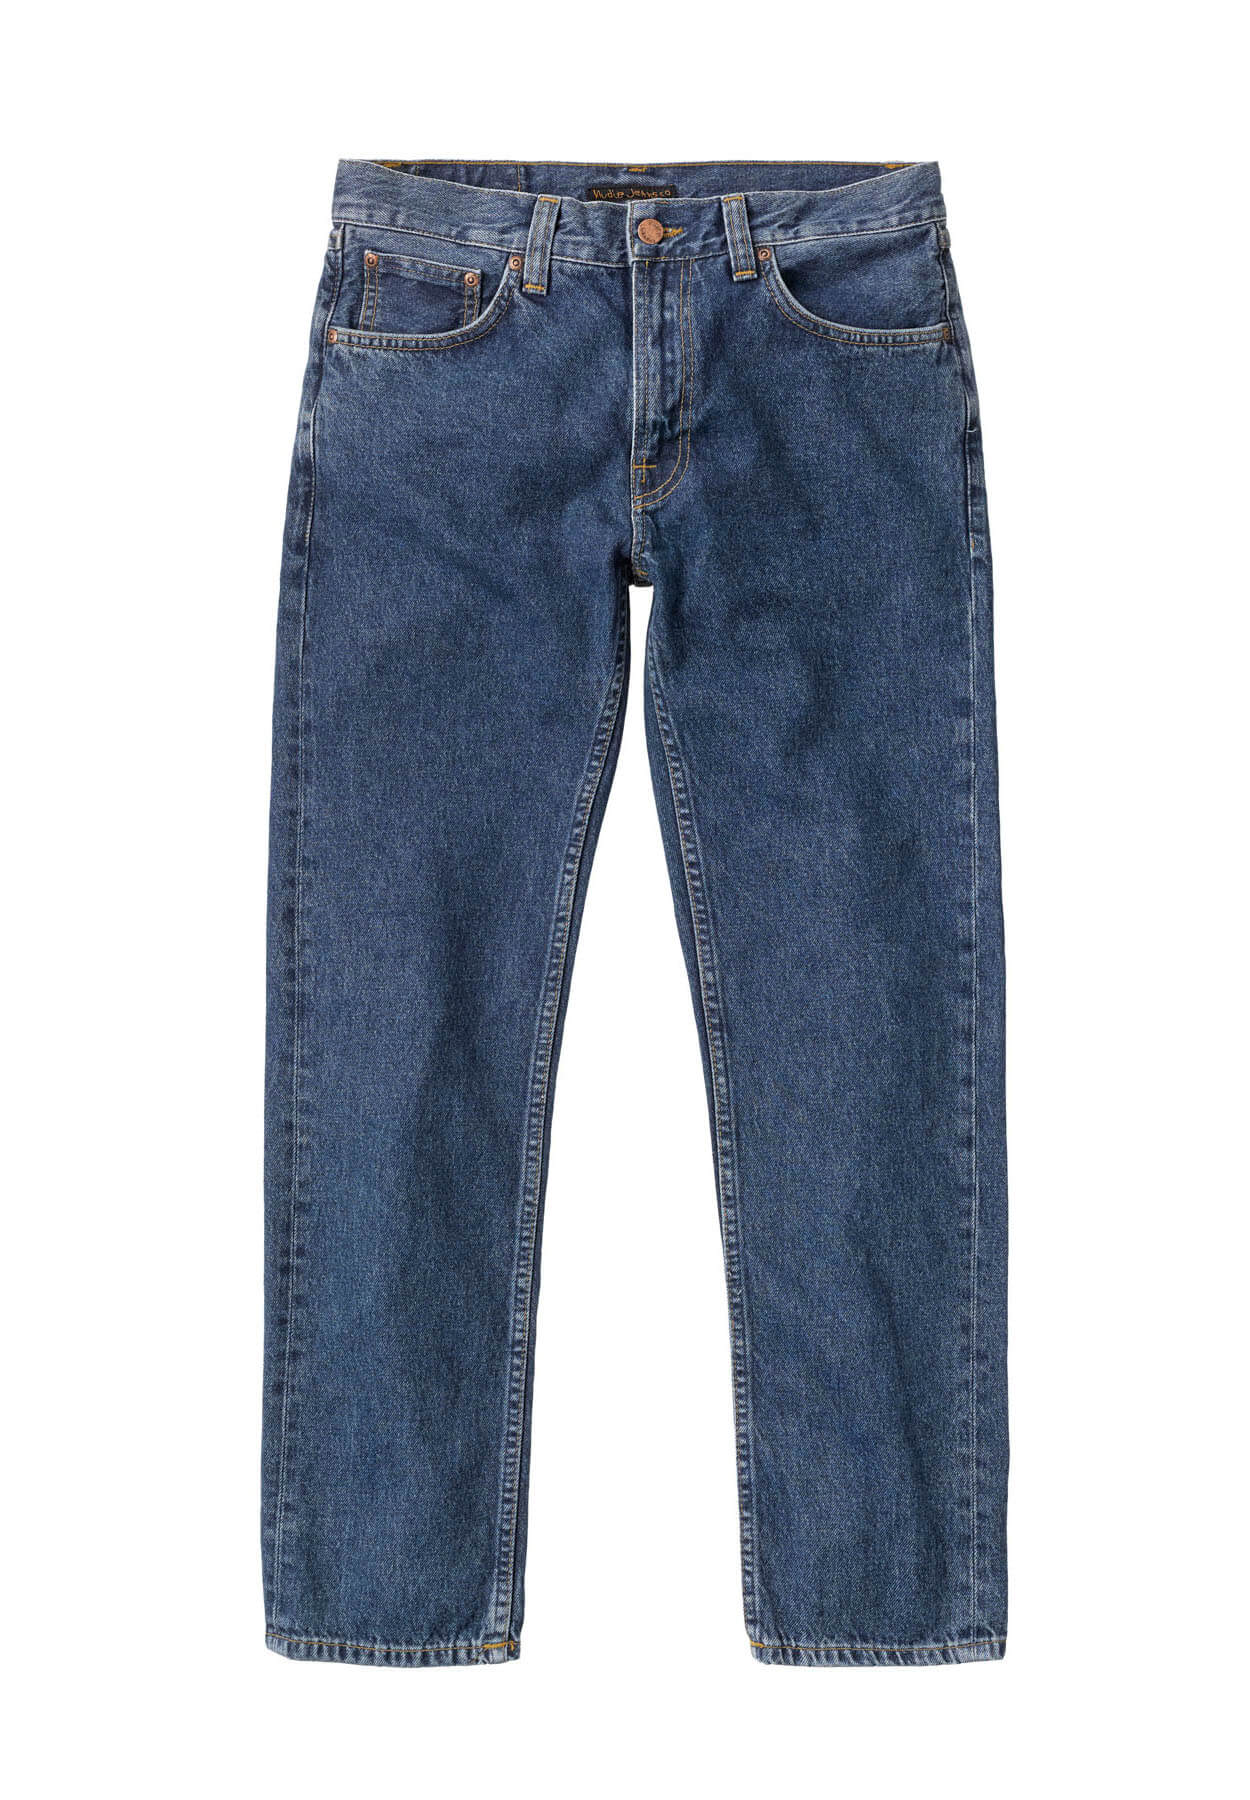 NUDIE JEANS Jeans Gritty Jackson 90s Stone 33/34